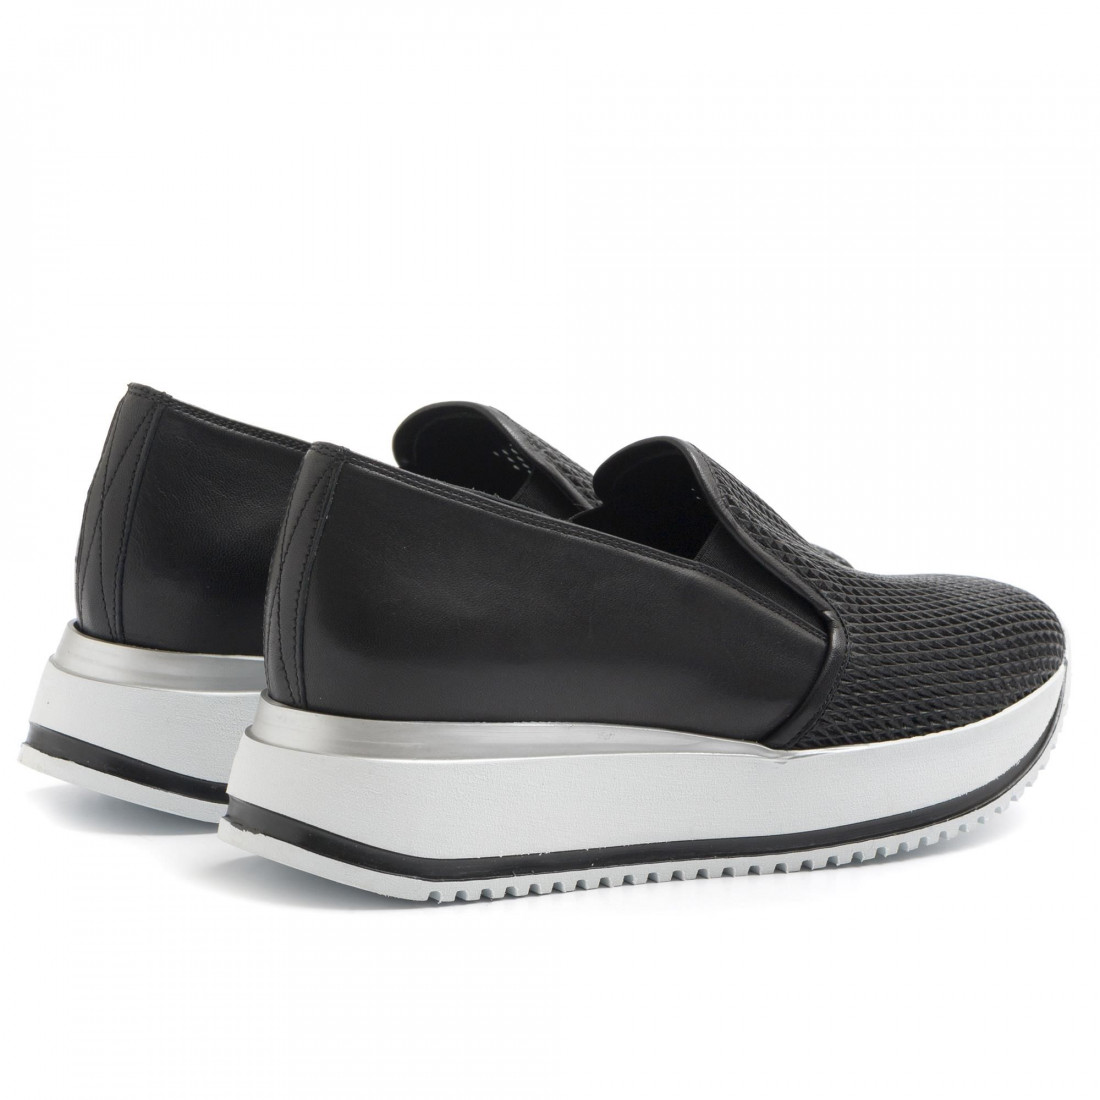 Low wedge slip on in black leather